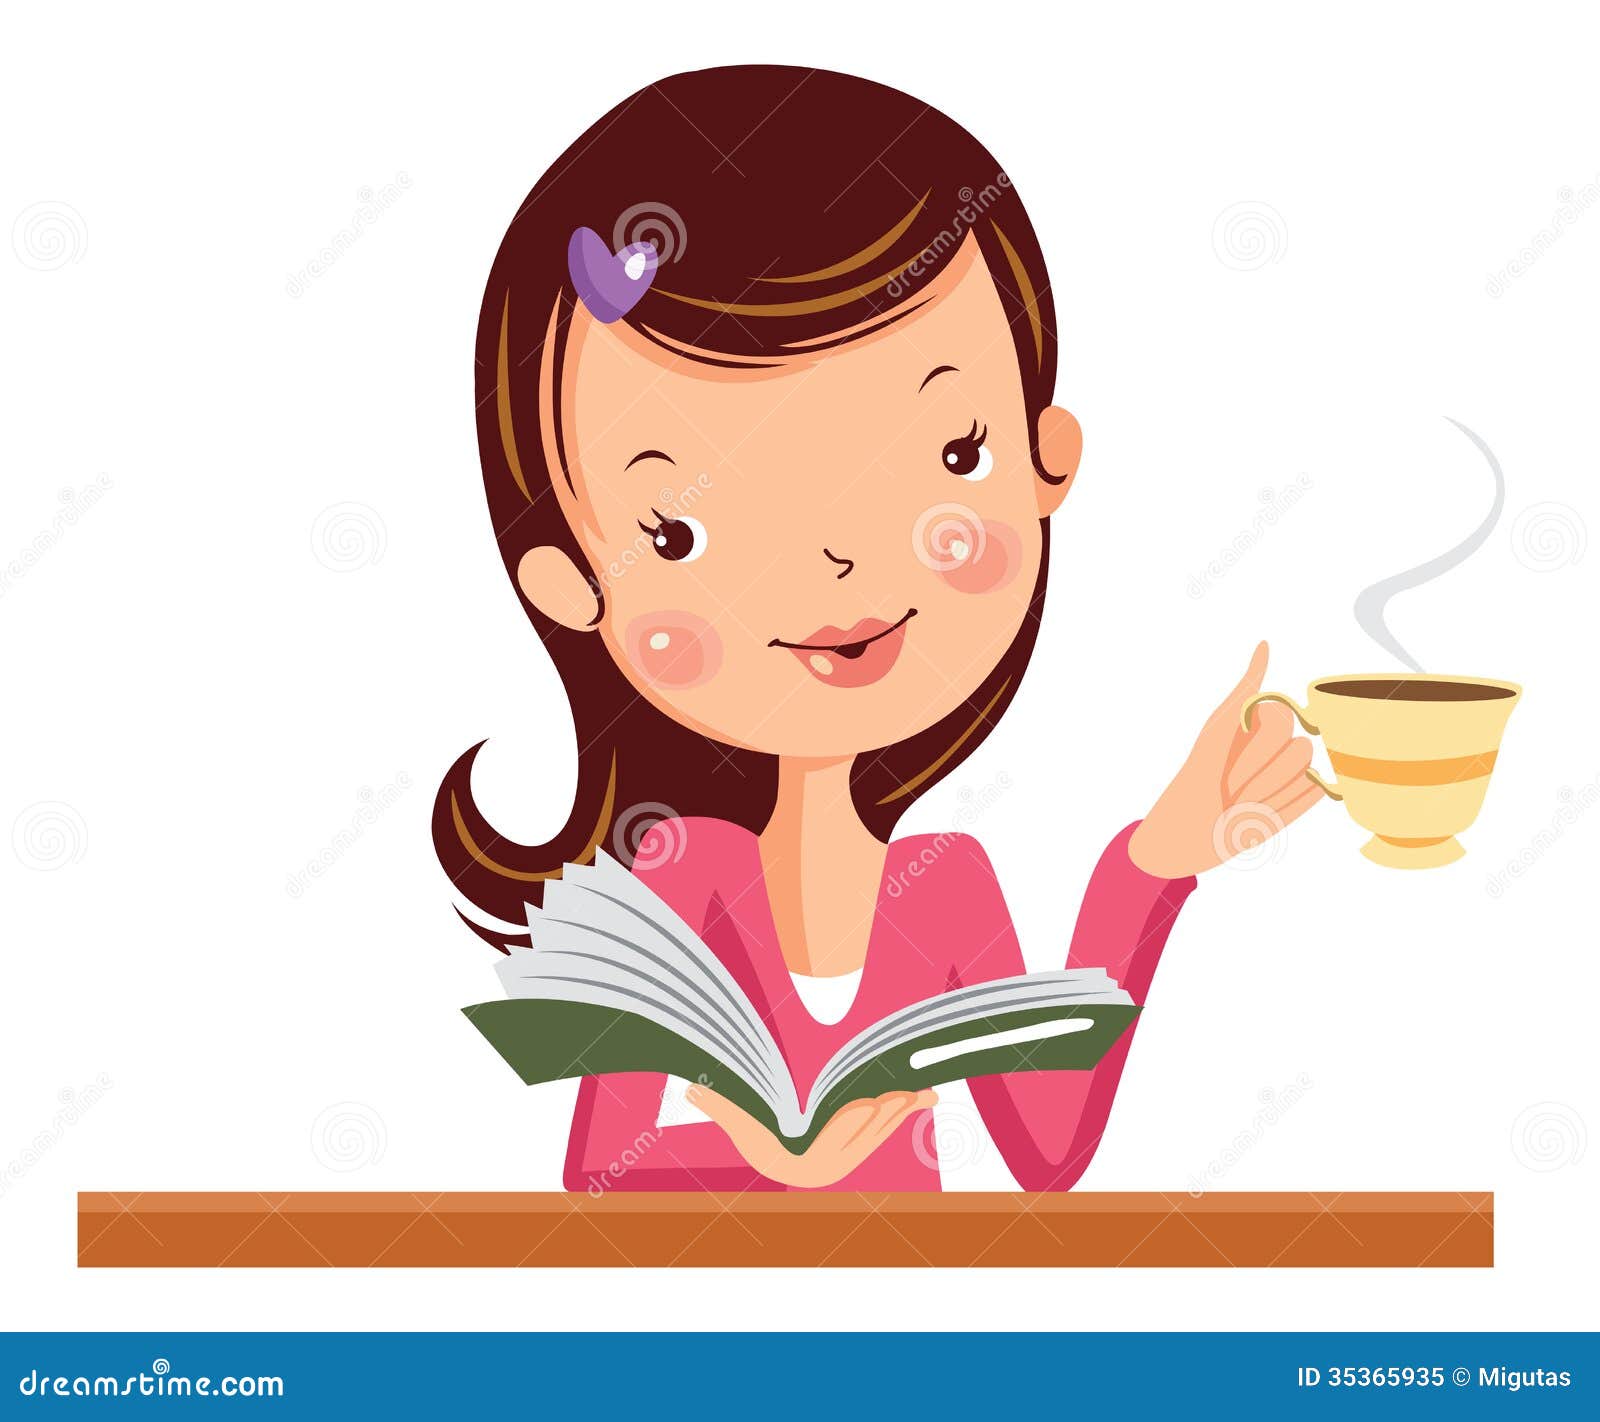 clipart woman reading book - photo #35